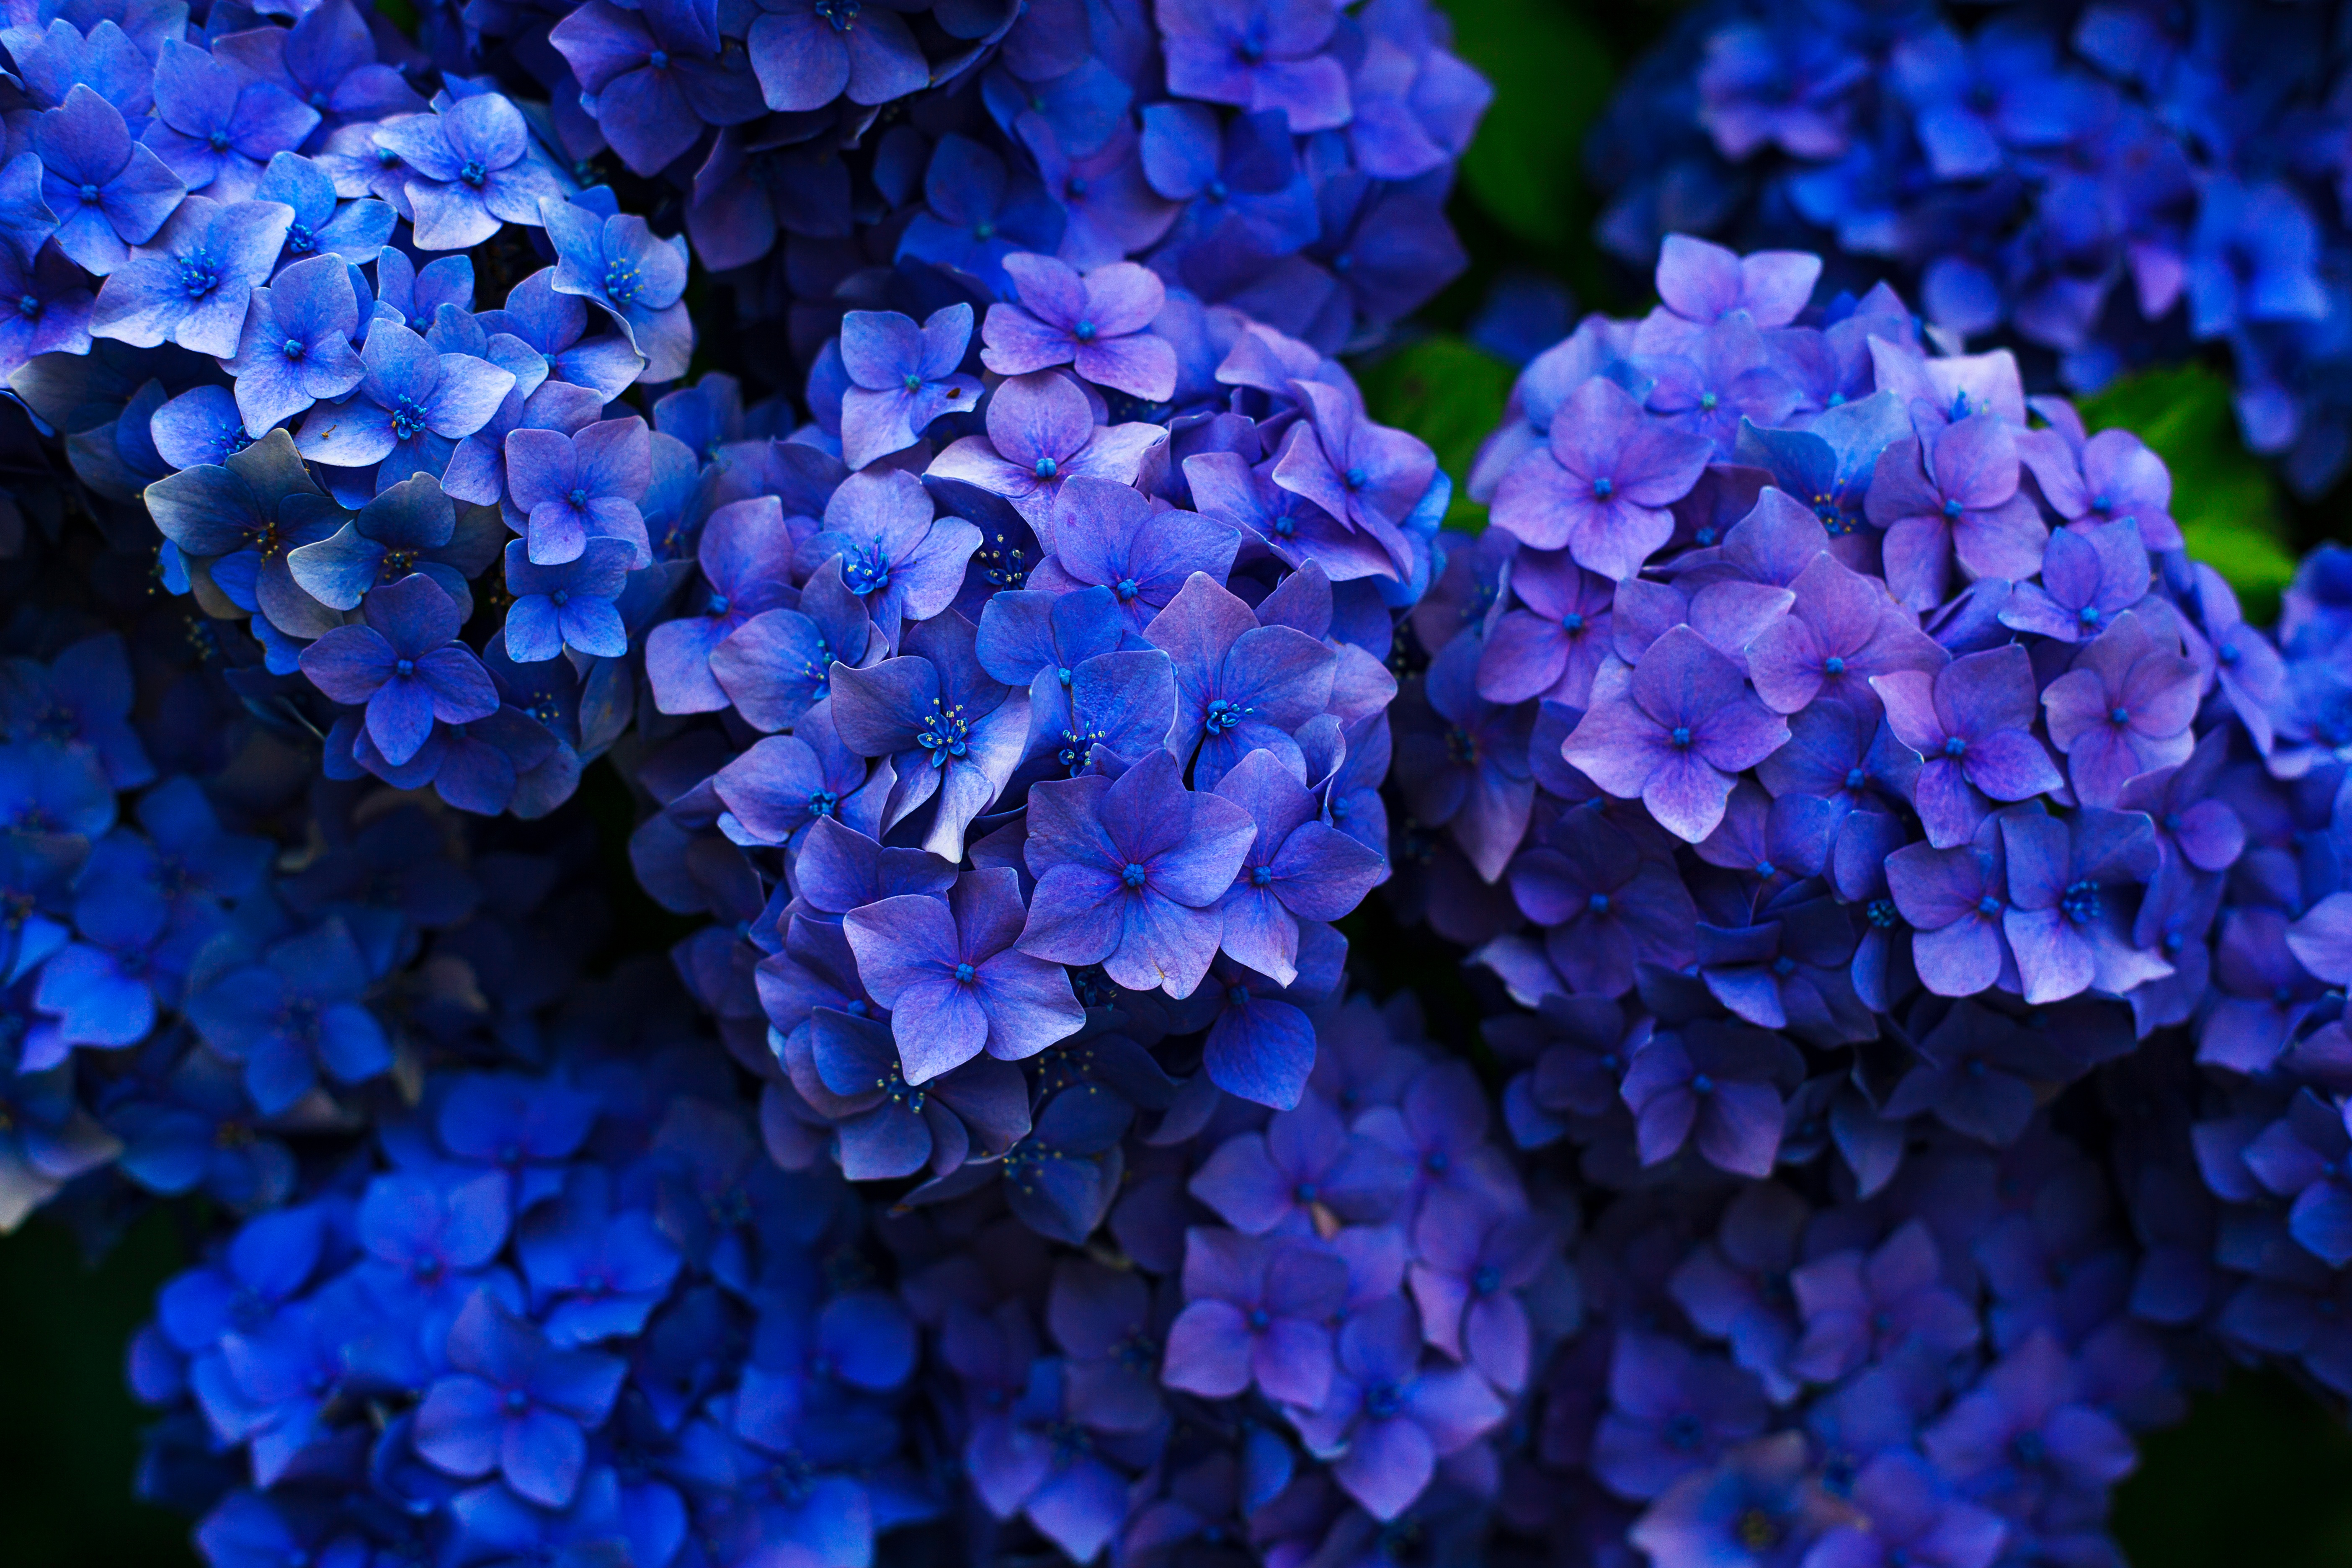 Hydrangeas are expensive out of season.